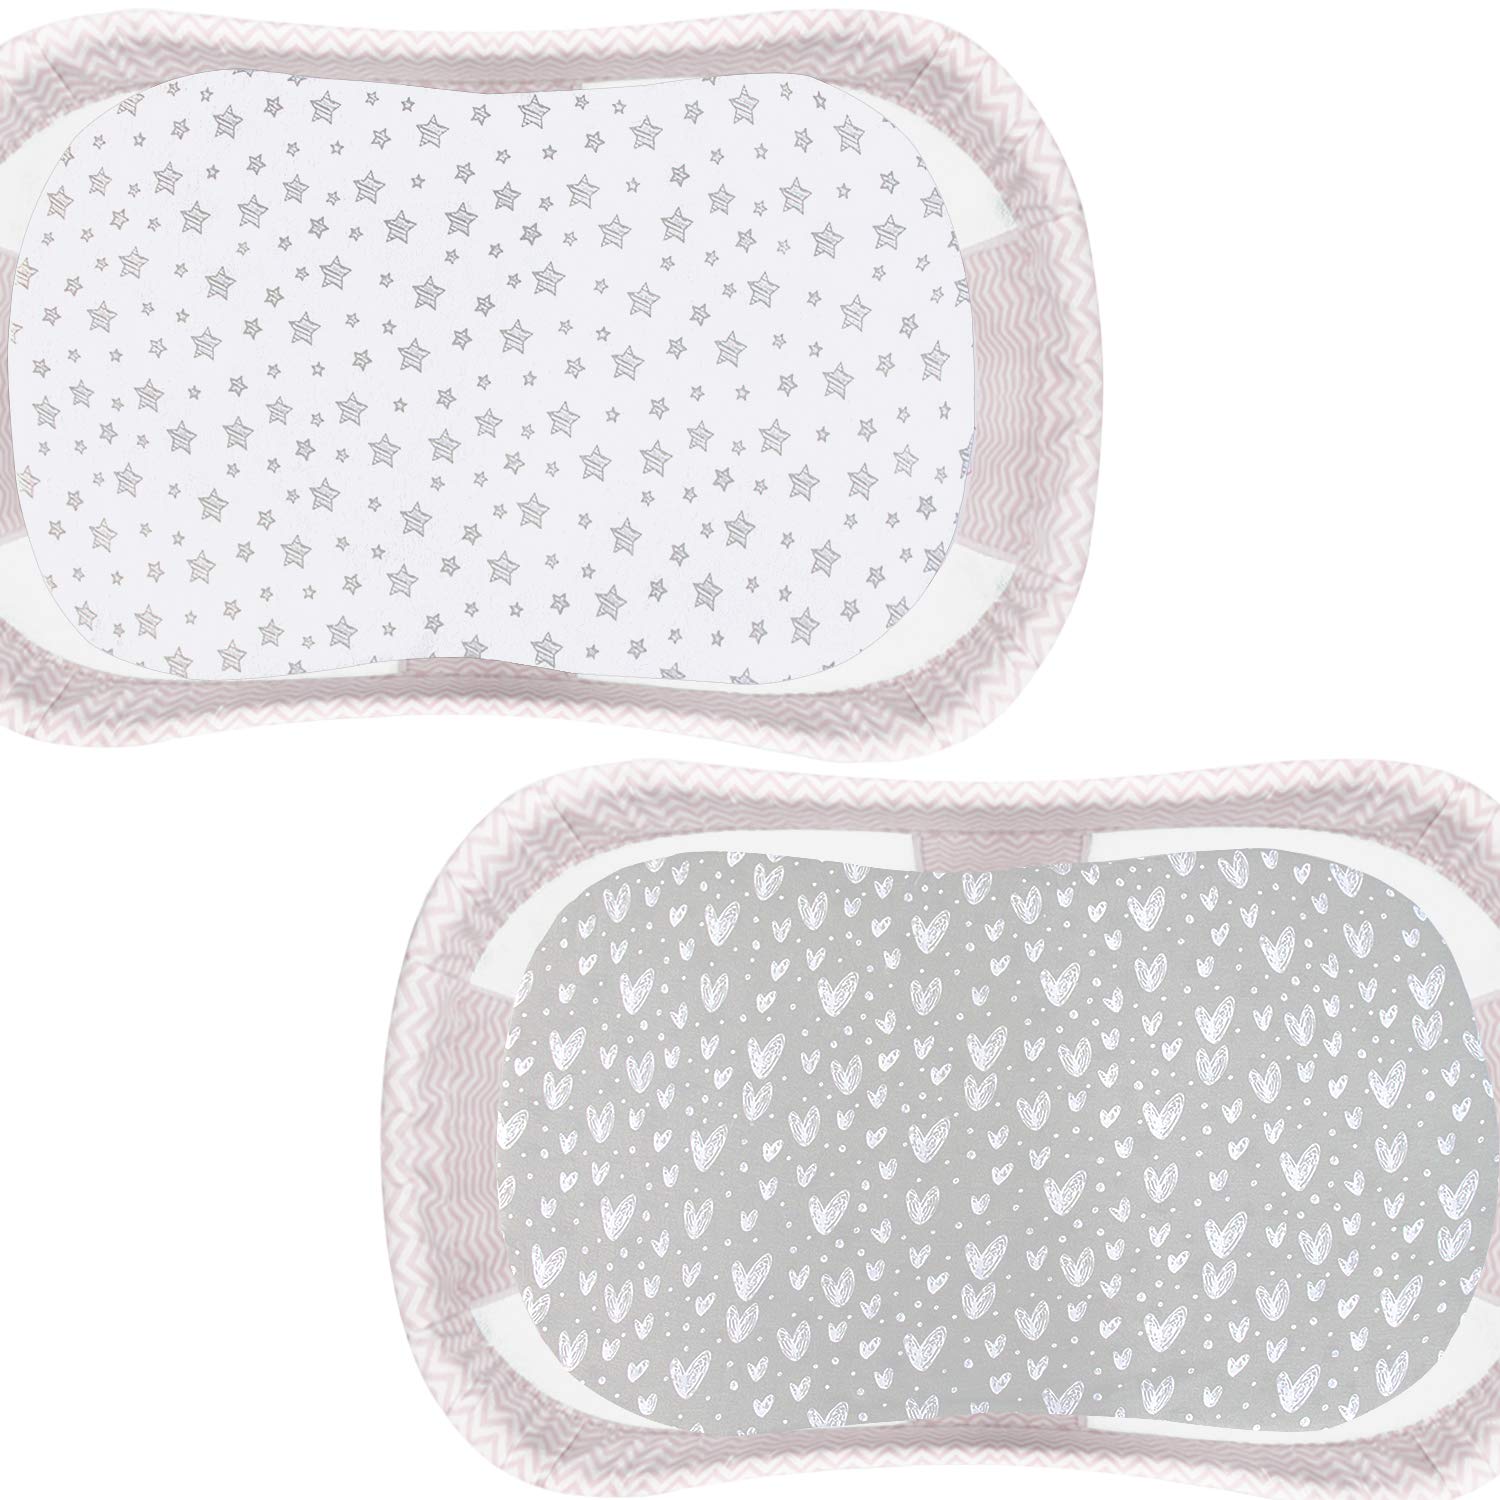 Bassinet Fitted Sheets - 2 Pack Cotton, Gray - Biloban Online Store